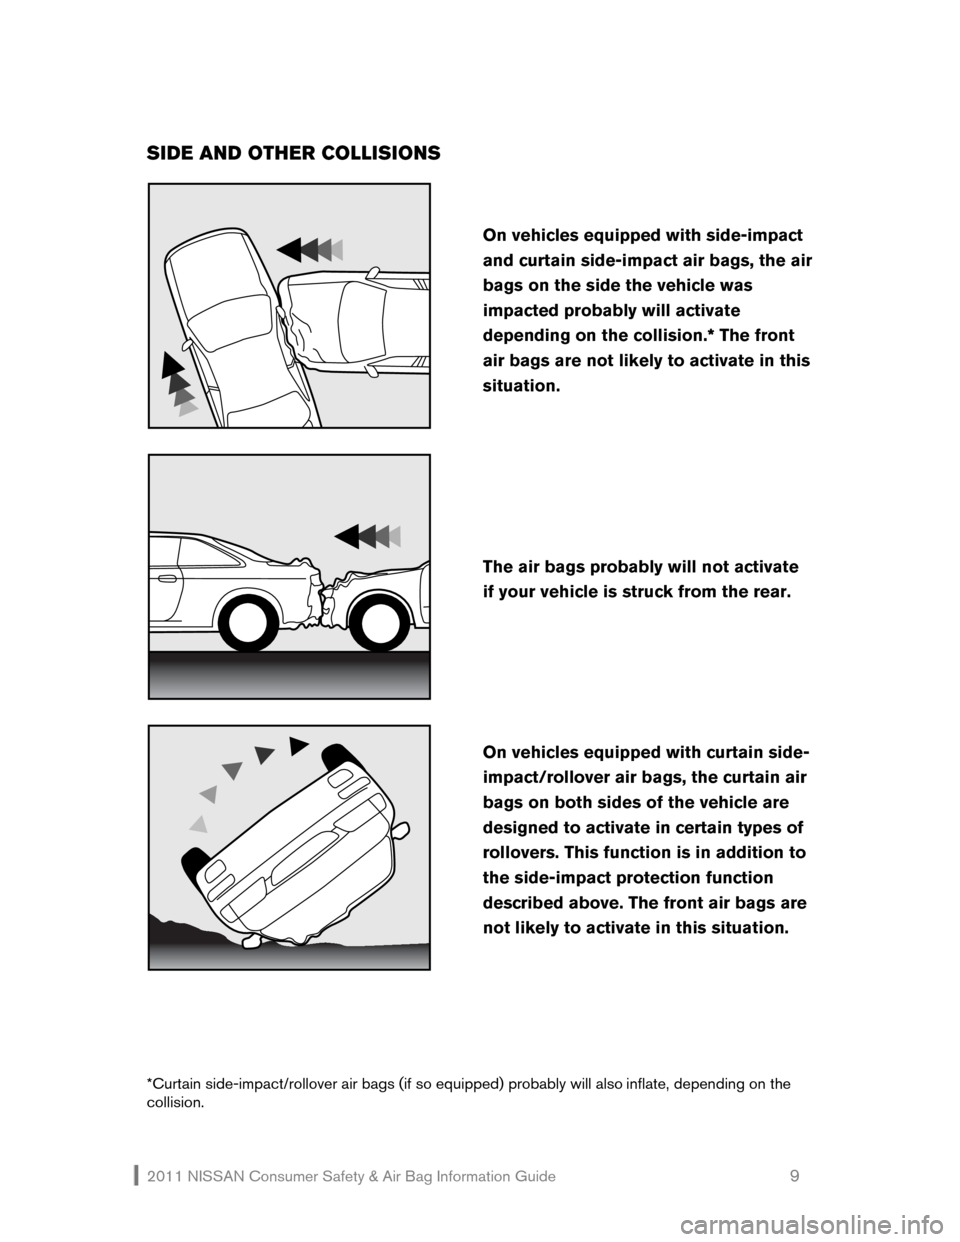 NISSAN XTERRA 2011 N50 / 2.G Consumer Safety Air Bag Information Guide 2011 NISSAN Consumer Safety & Air Bag Information Guide                                                       9 
SIDE AND OTHER COLLISIONS 
 
 
 
 
 
*Curtain side-impact/rollover air bags (if so equi